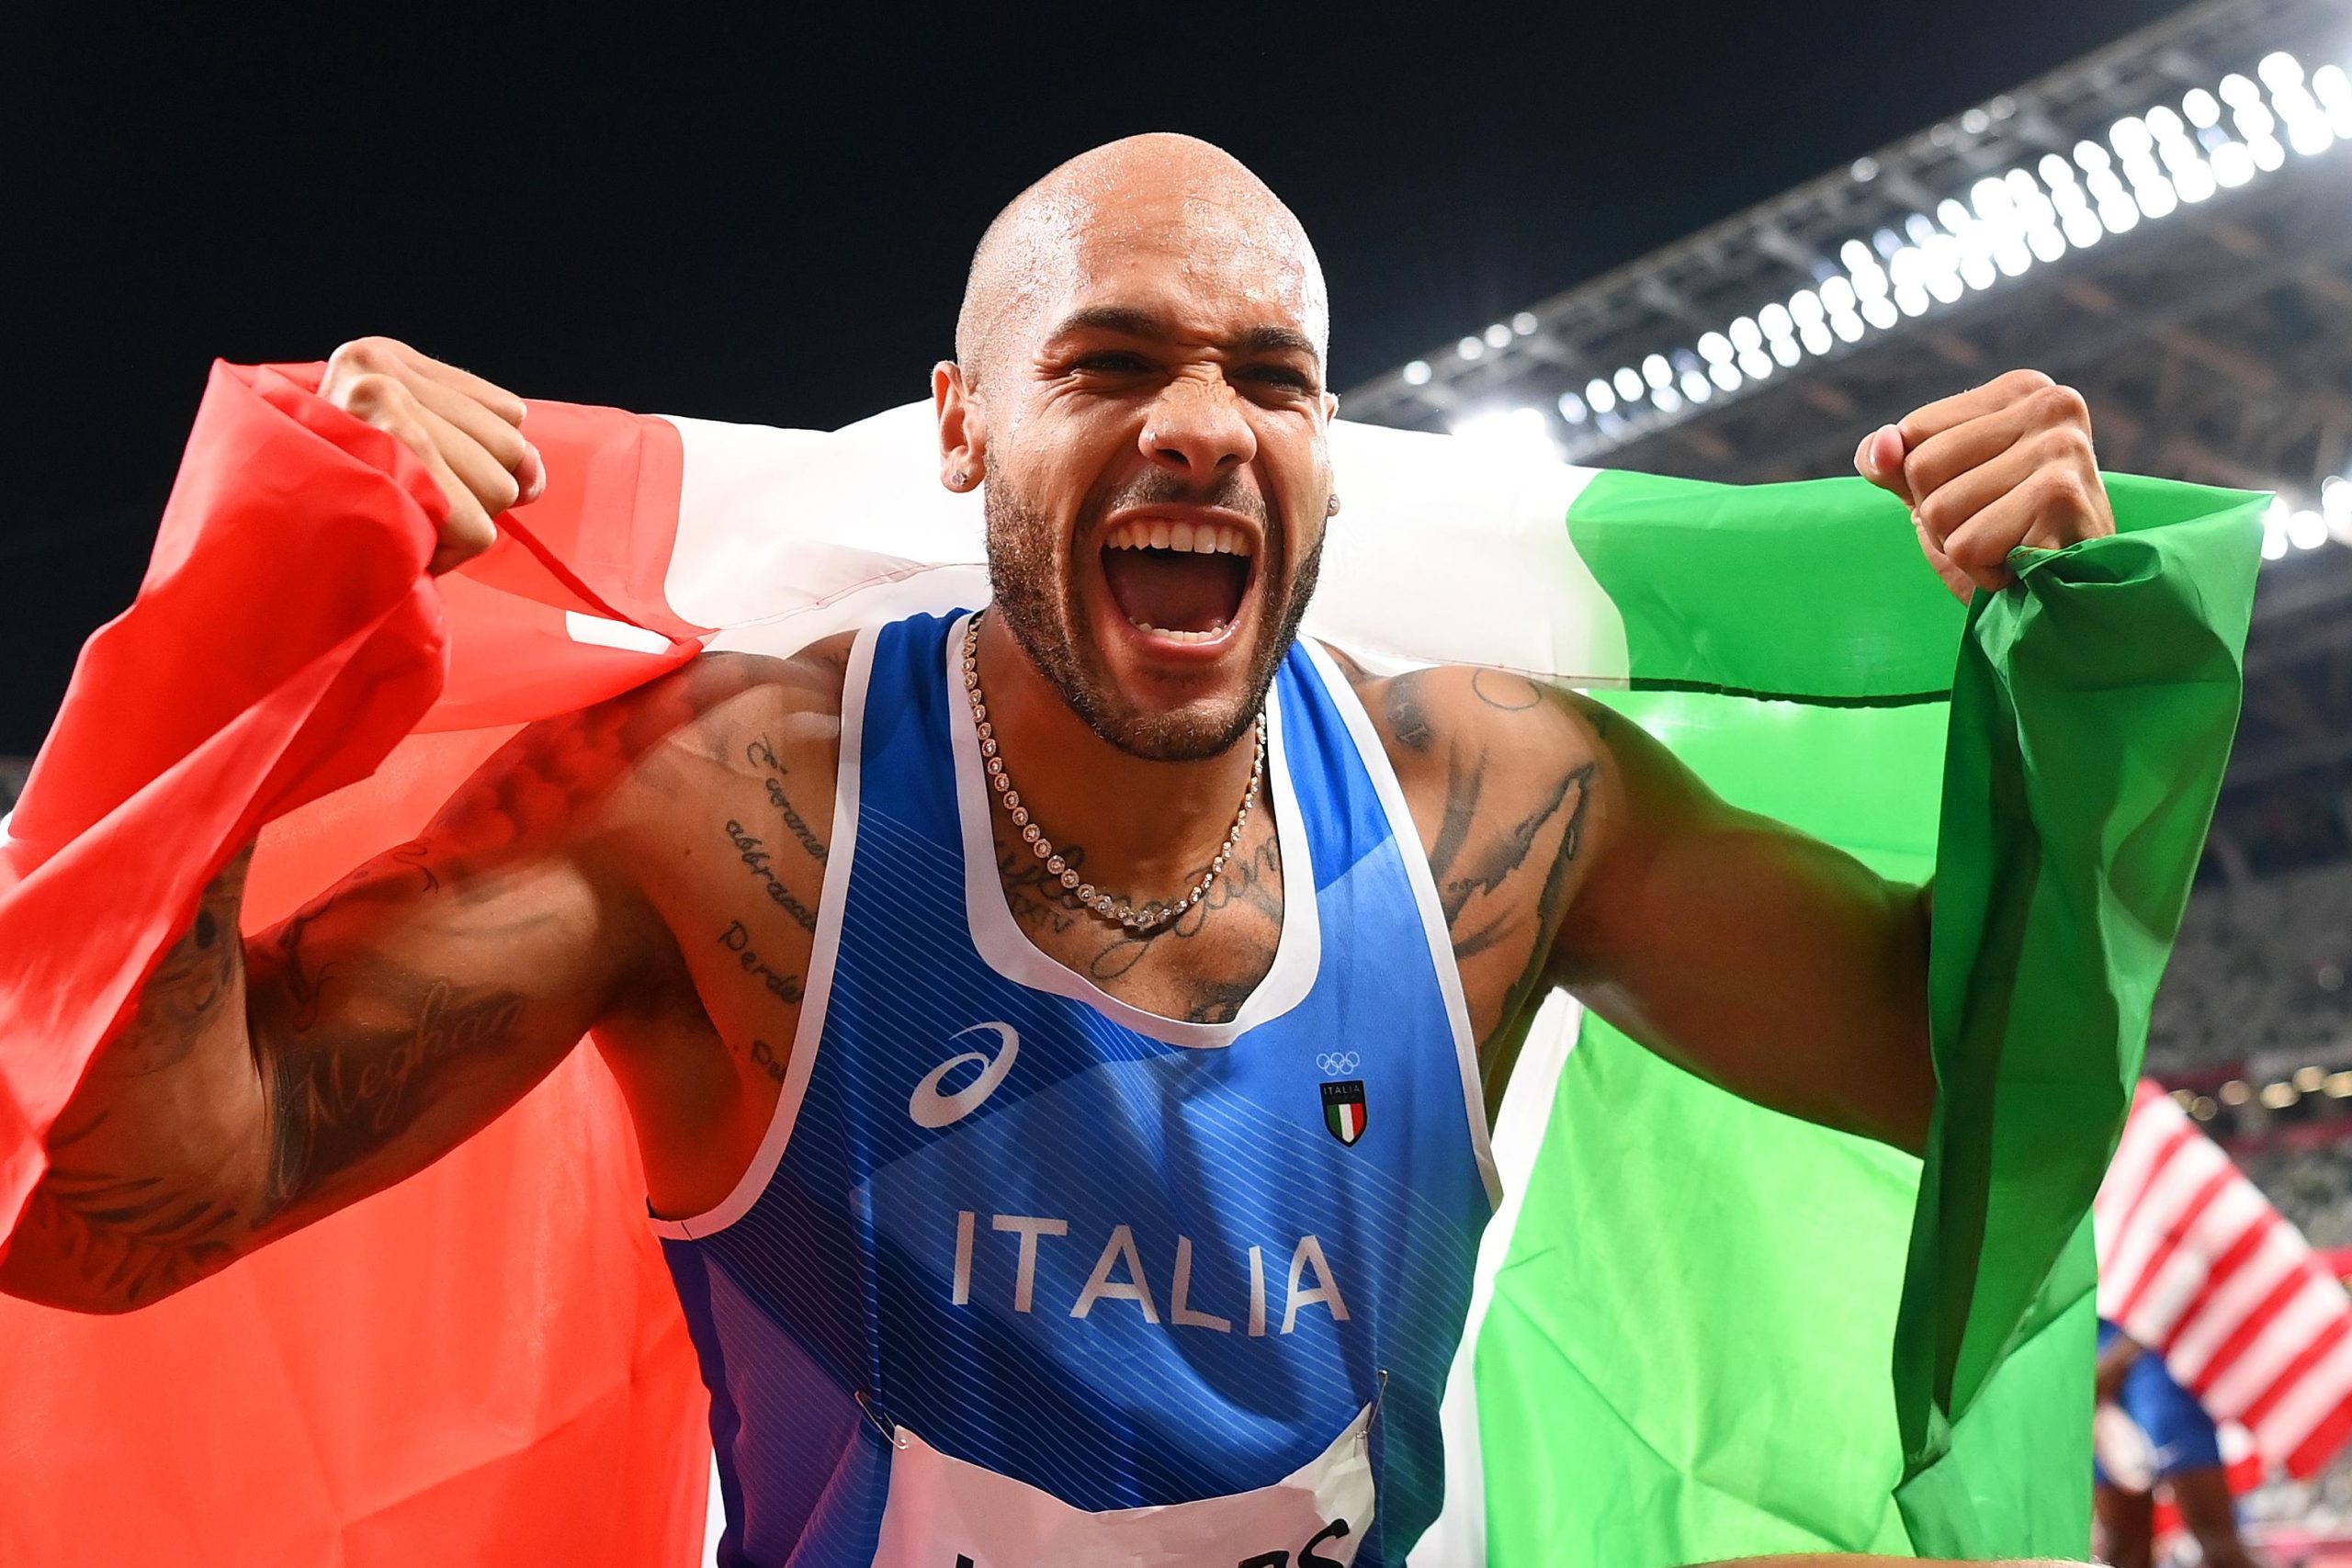 Italy's Marcell Jacobs to Lead Men's 60m at ORLEN Cup in Lodz